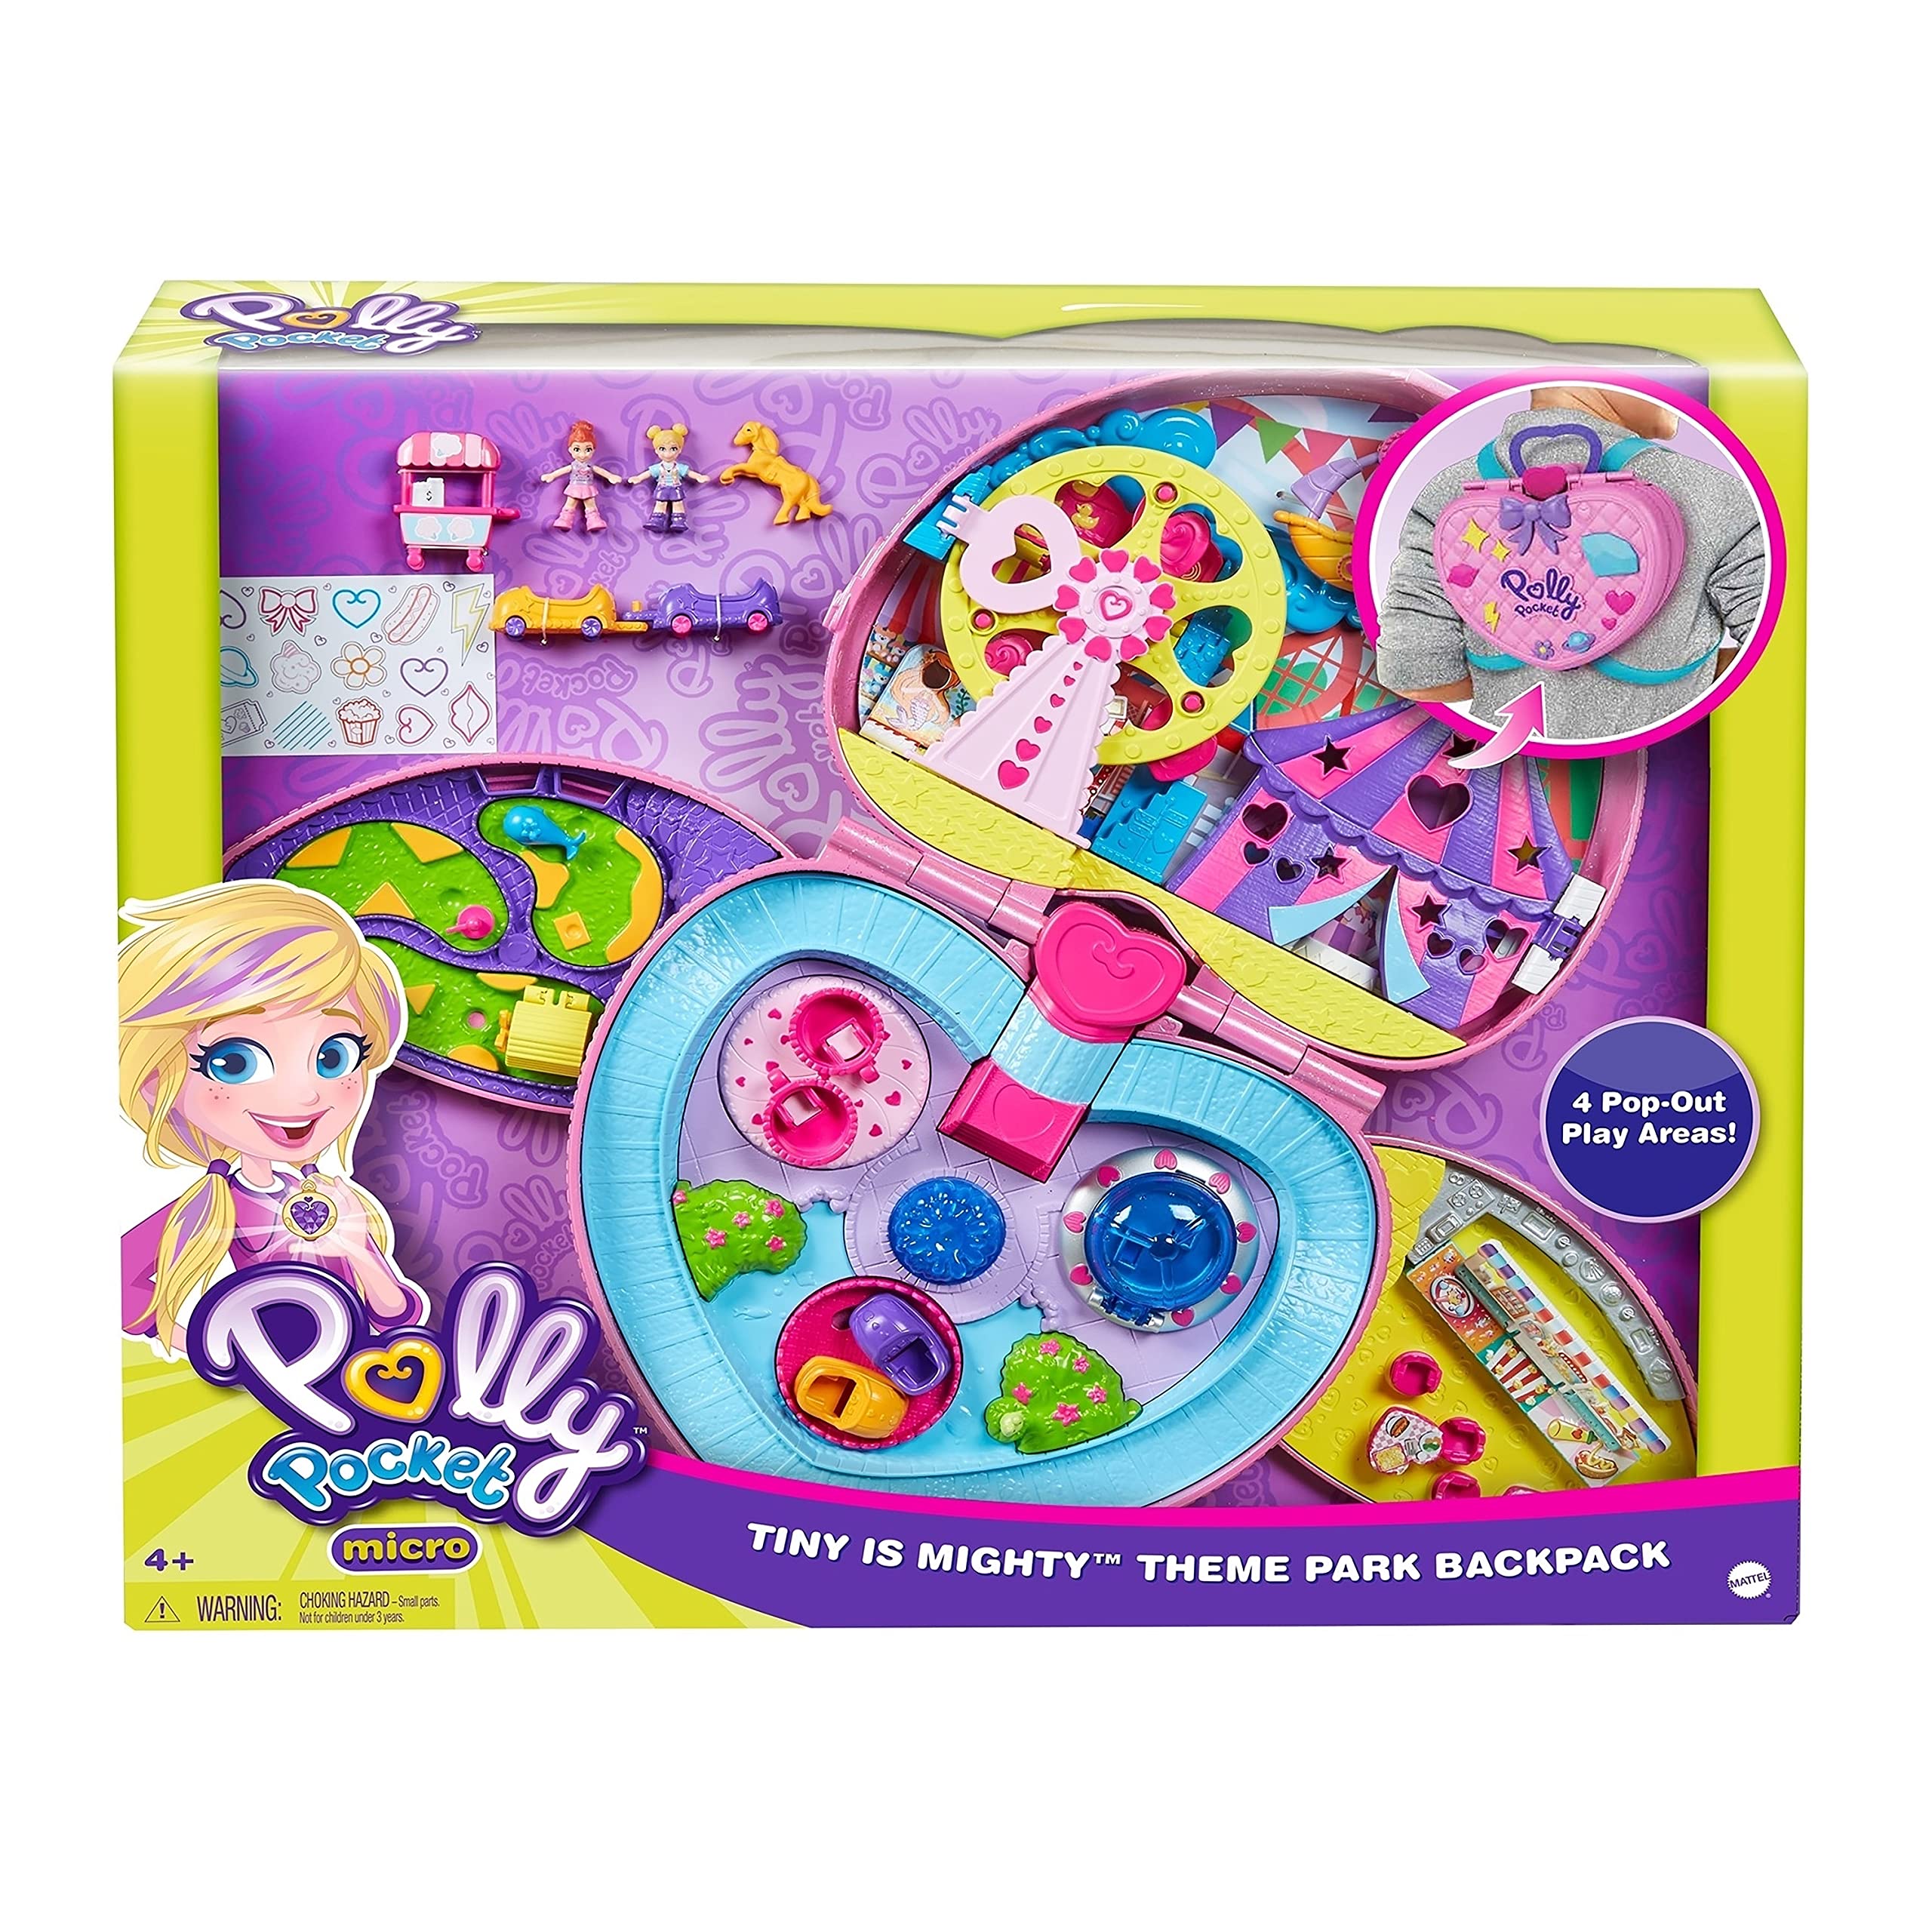 Polly Pocket 2-In-1 Travel Toy Playset with 2 Micro Dolls & Toy Cars, Tiny Is Mighty Theme Park Backpack Compact